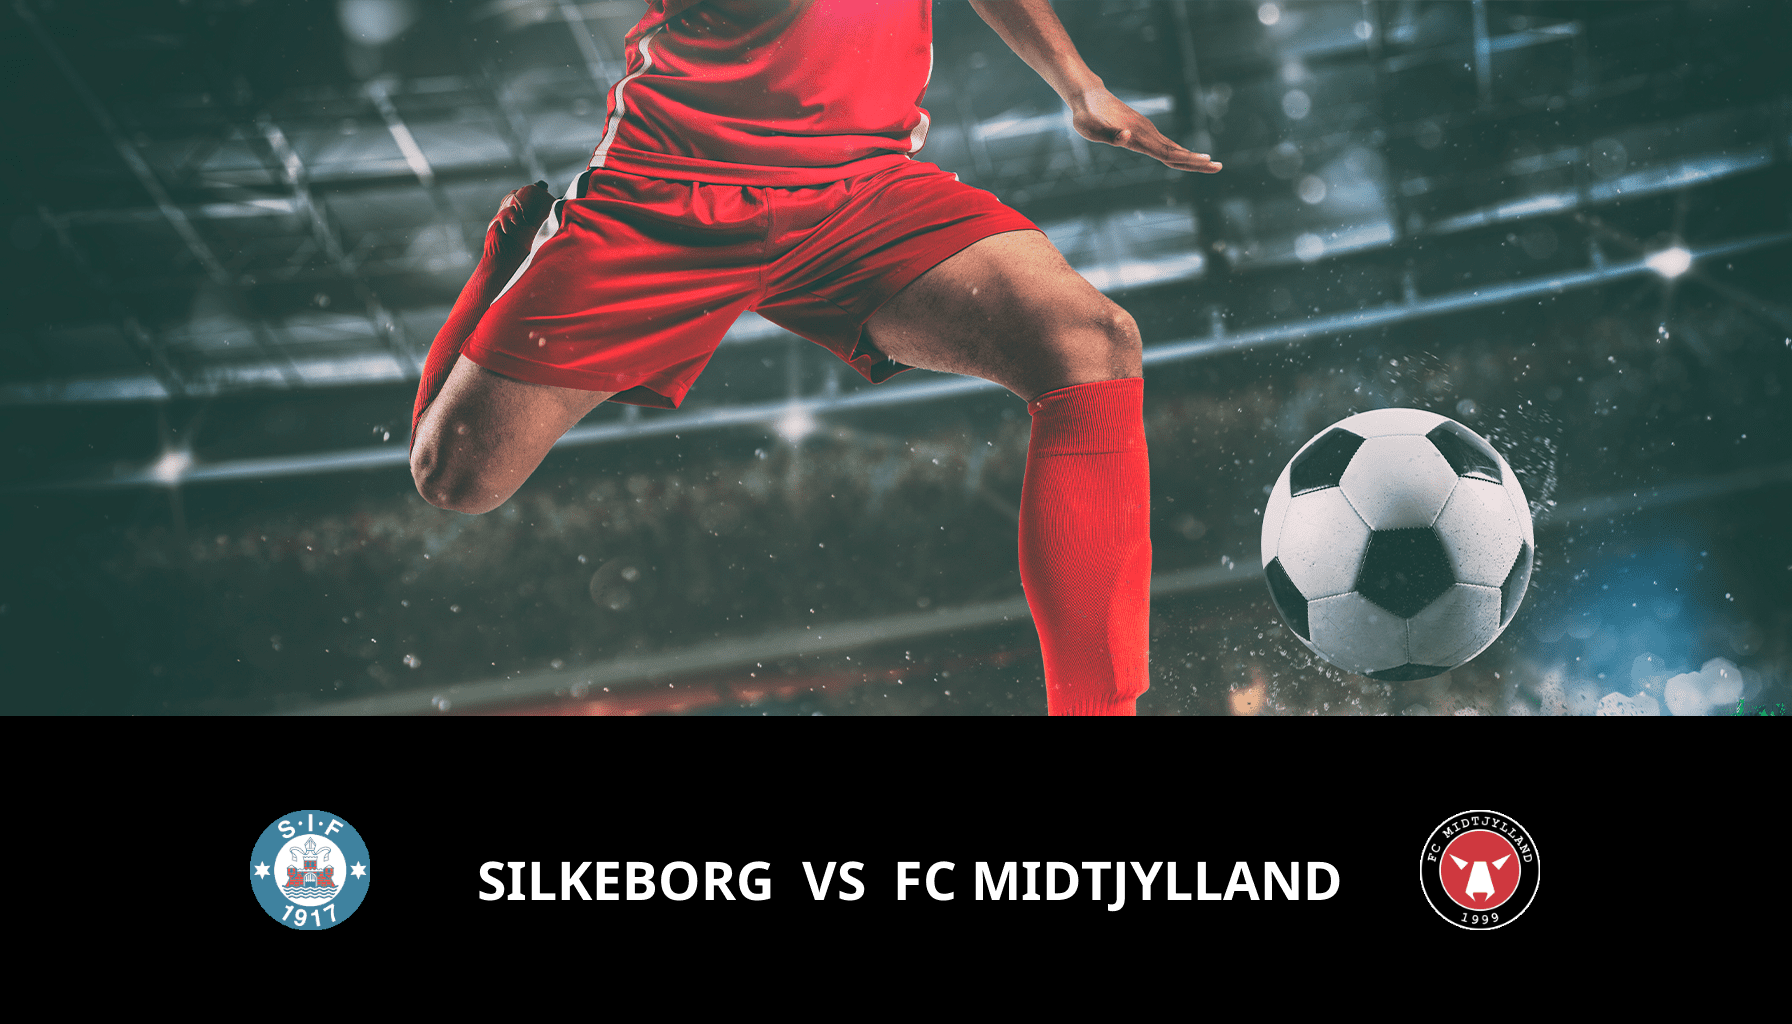 Previsione per Silkeborg VS FC Midtjylland il 29/04/2024 Analysis of the match